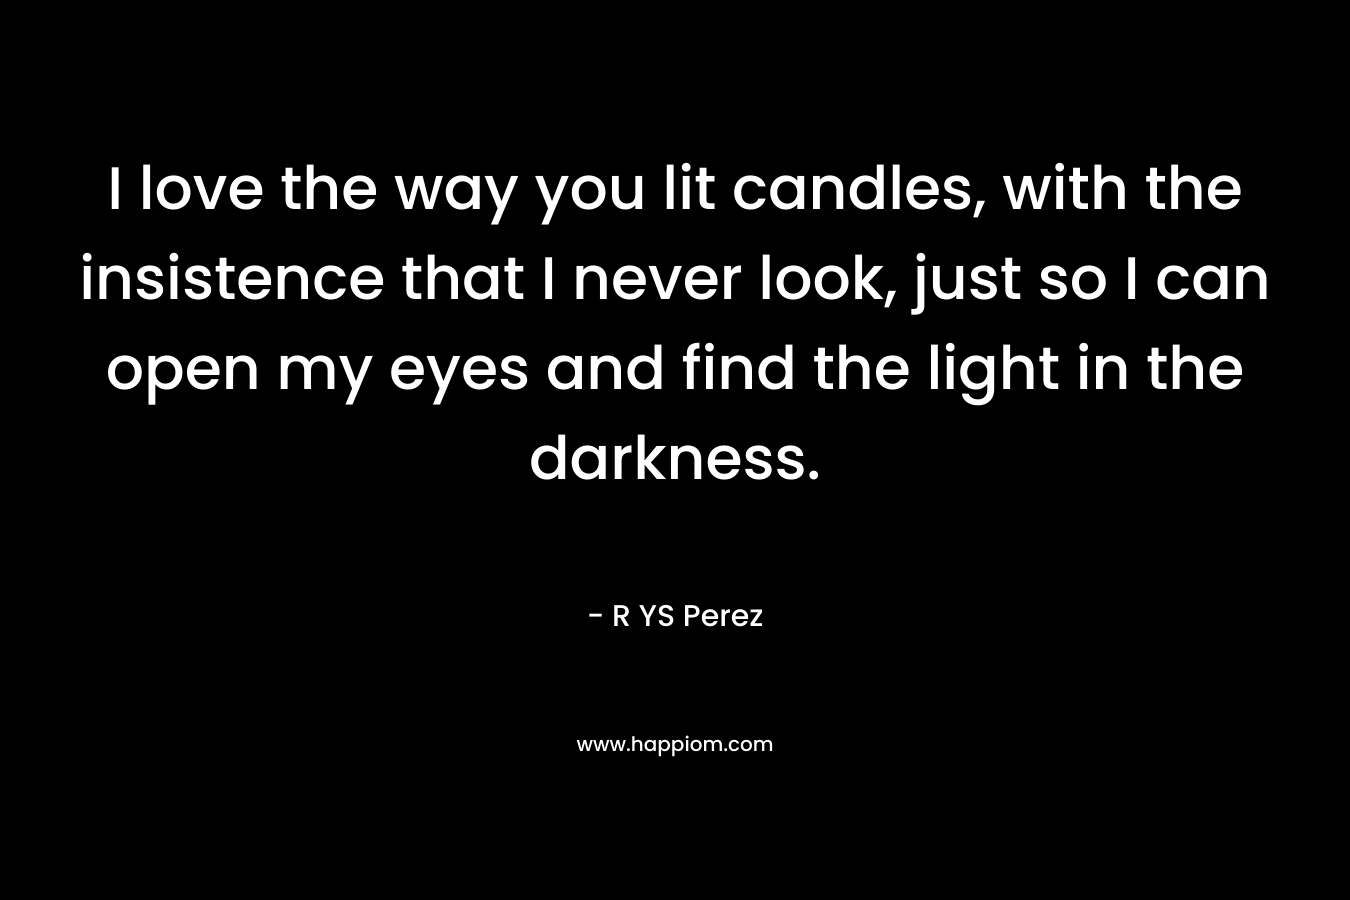 I love the way you lit candles, with the insistence that I never look, just so I can open my eyes and find the light in the darkness.